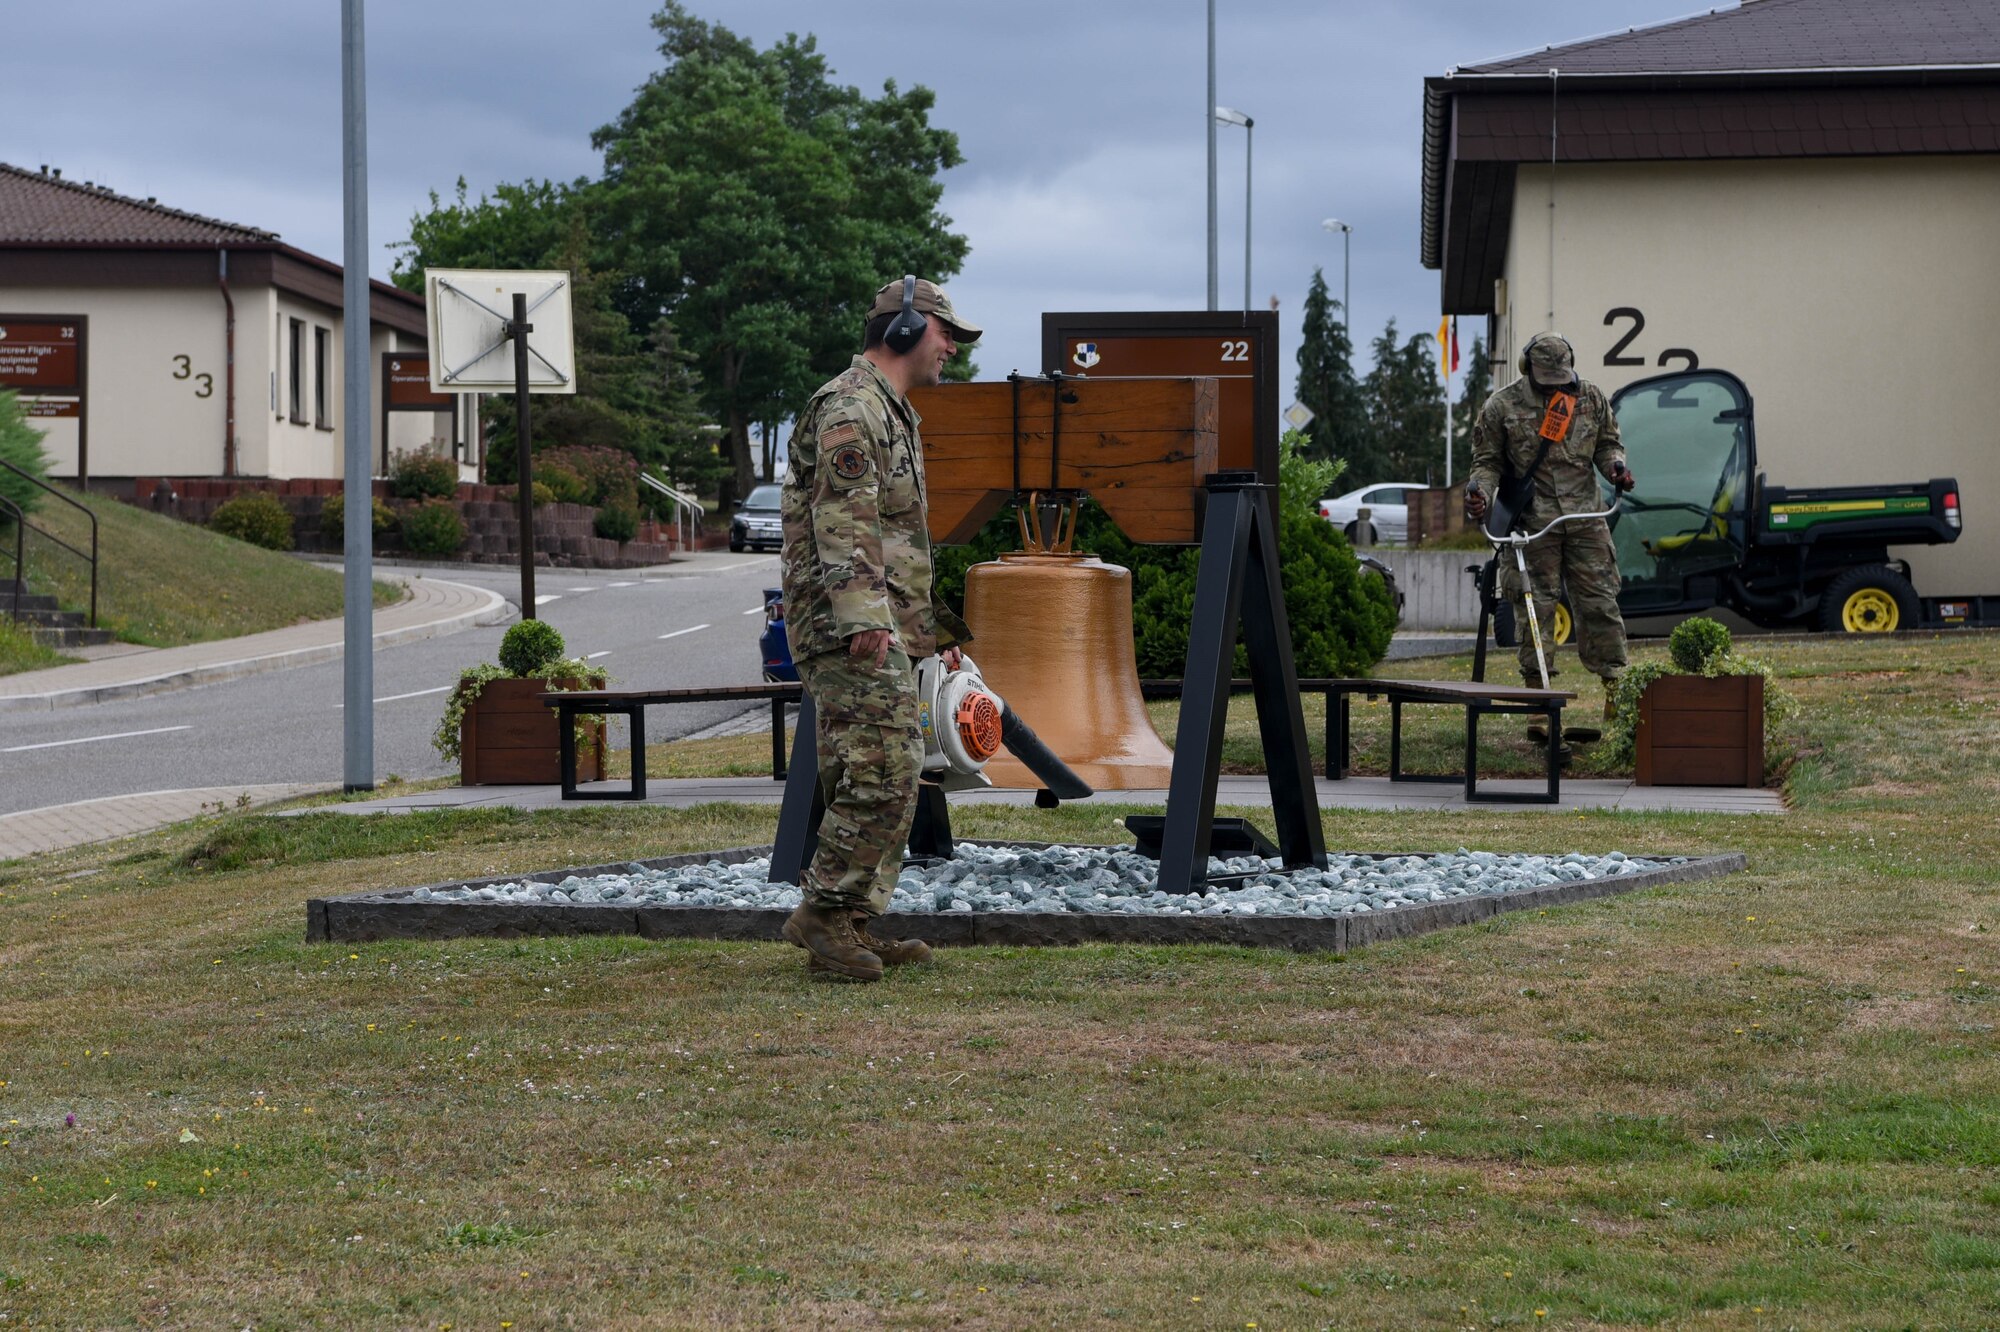 U.S. Air Force Airmen from the 52nd Maintenance Squadron clean up the area around the Spangdahlem Heritage Bell on
July 7, 2022, on Spangdahlem Air Base, Germany. The bell was a gift from the local community in July 1976 to celebrate the U.S. Bicentennial. (U.S. Air Force photo by Airman 1st Class Imani West)